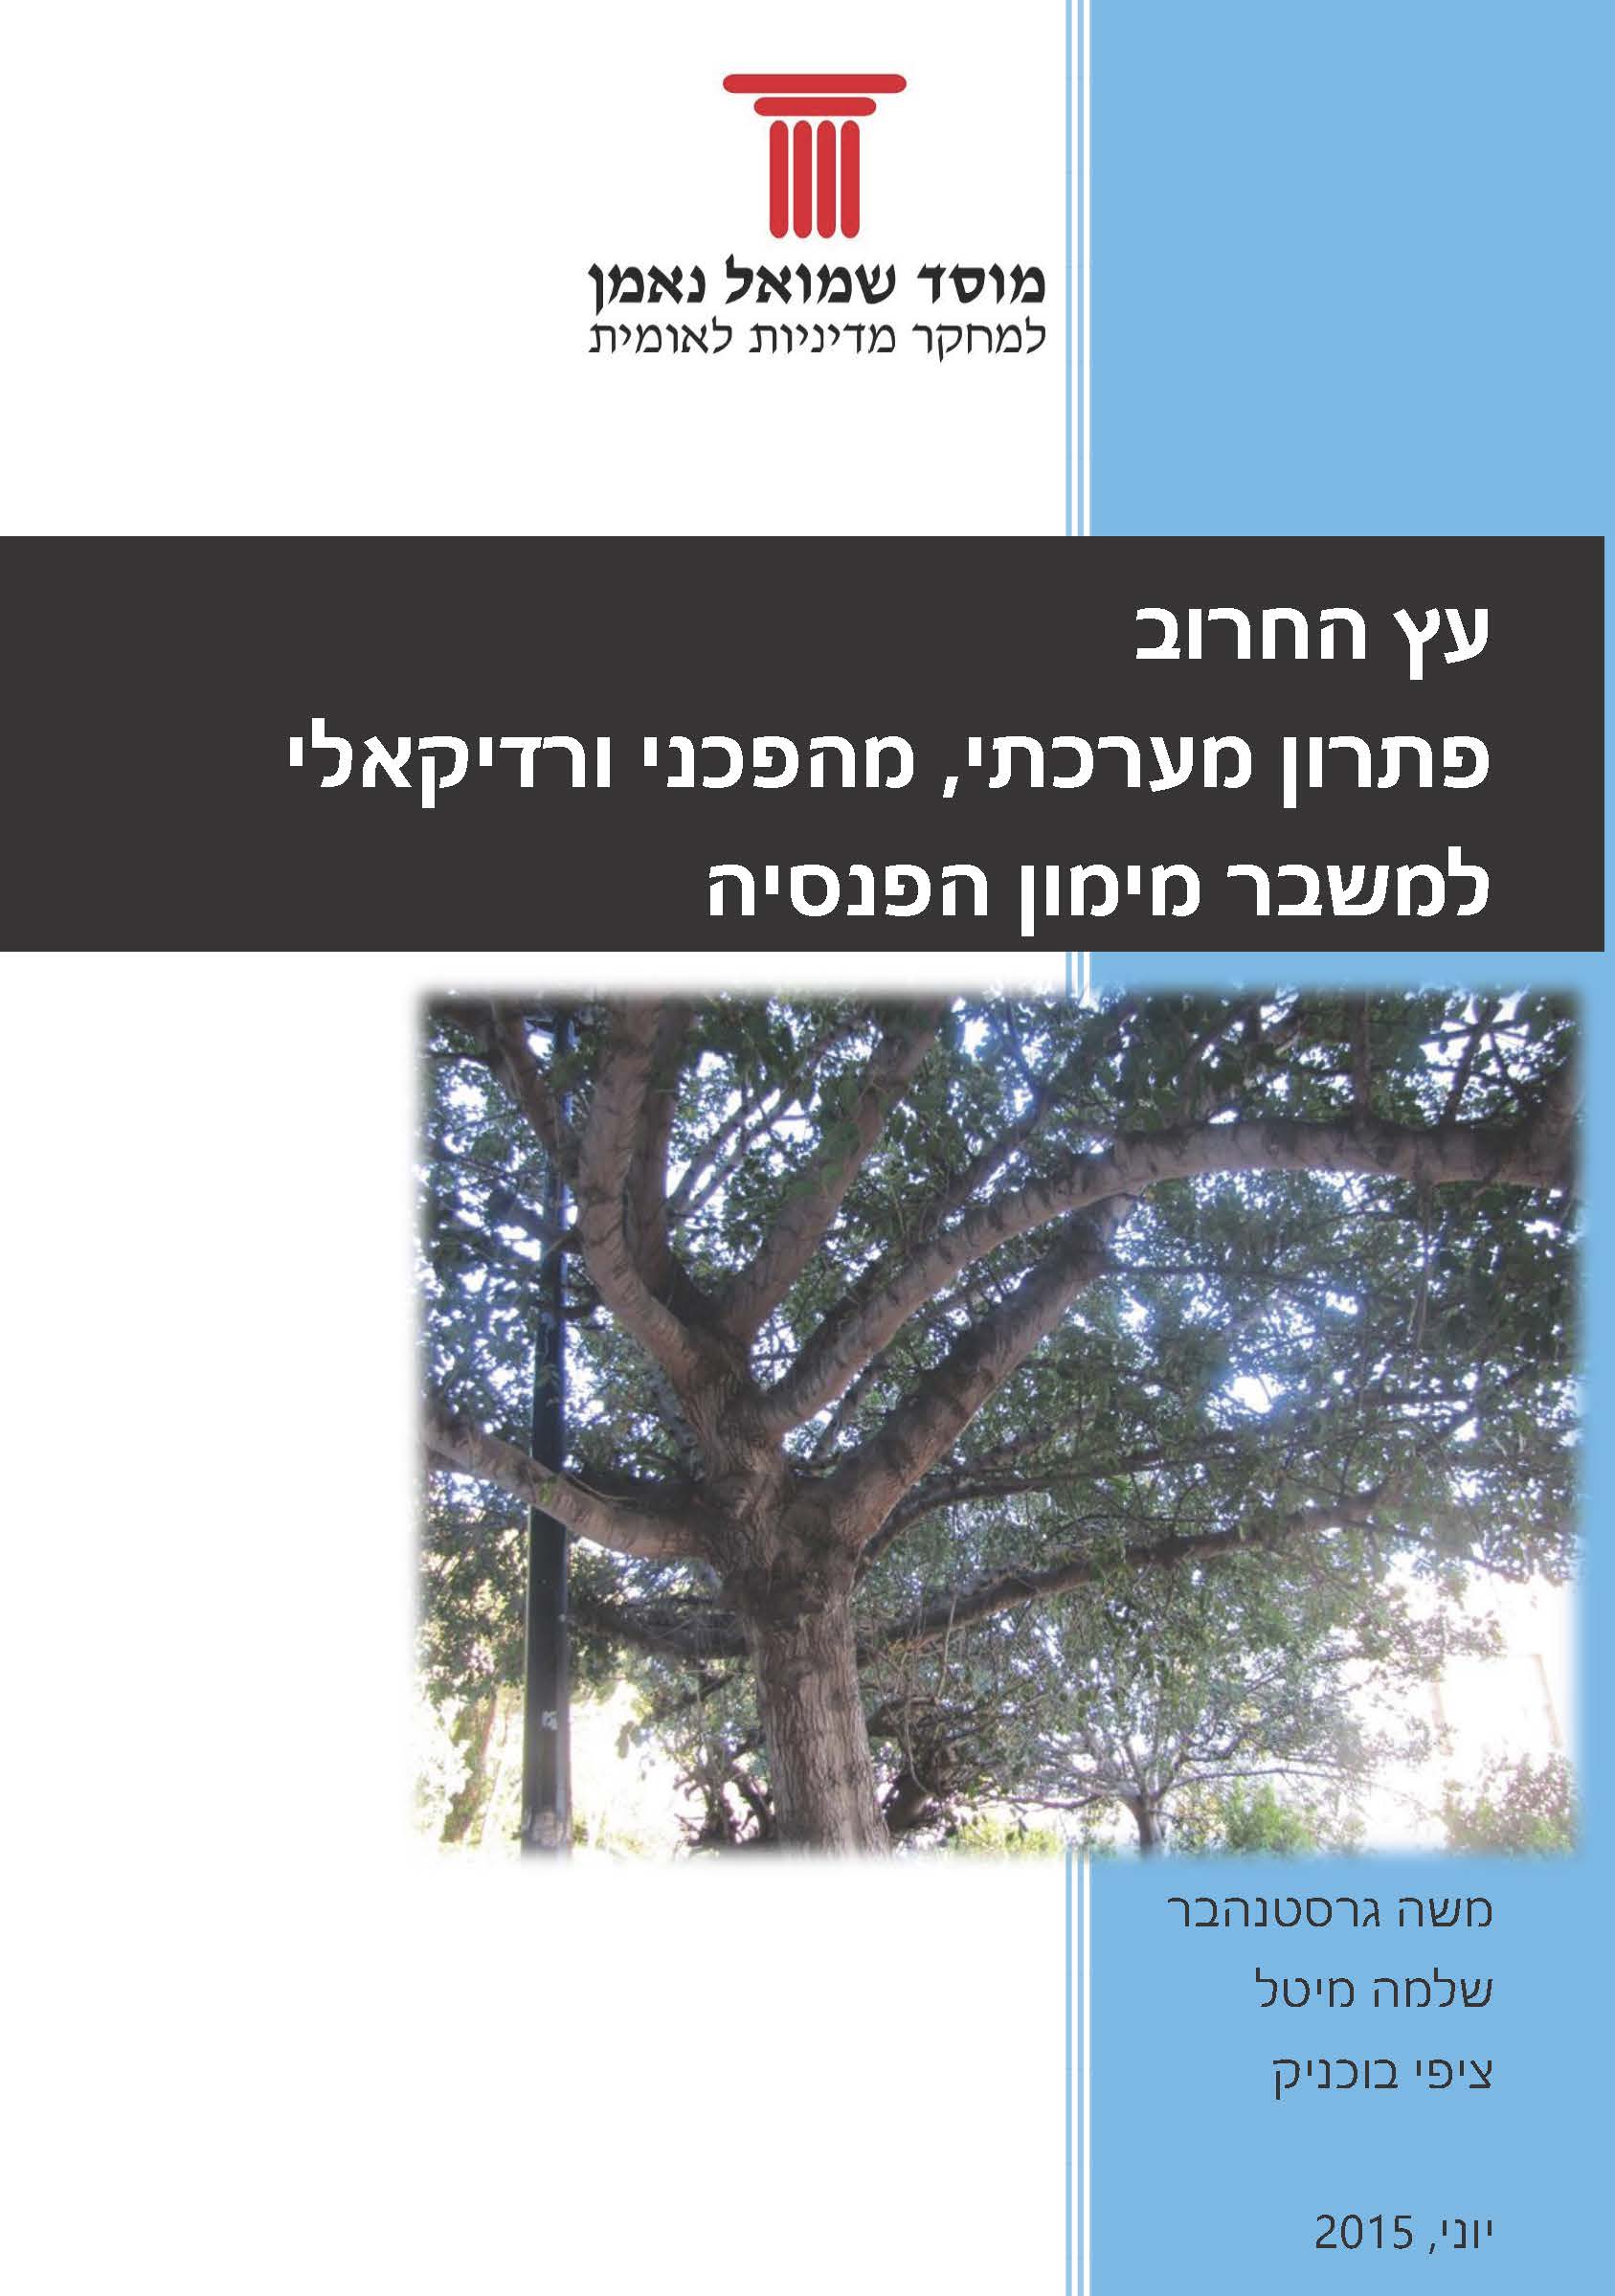 The Carob Tree - A Radical Evolutionary Systemic Solution to the Pension Crisis (Hebrew)